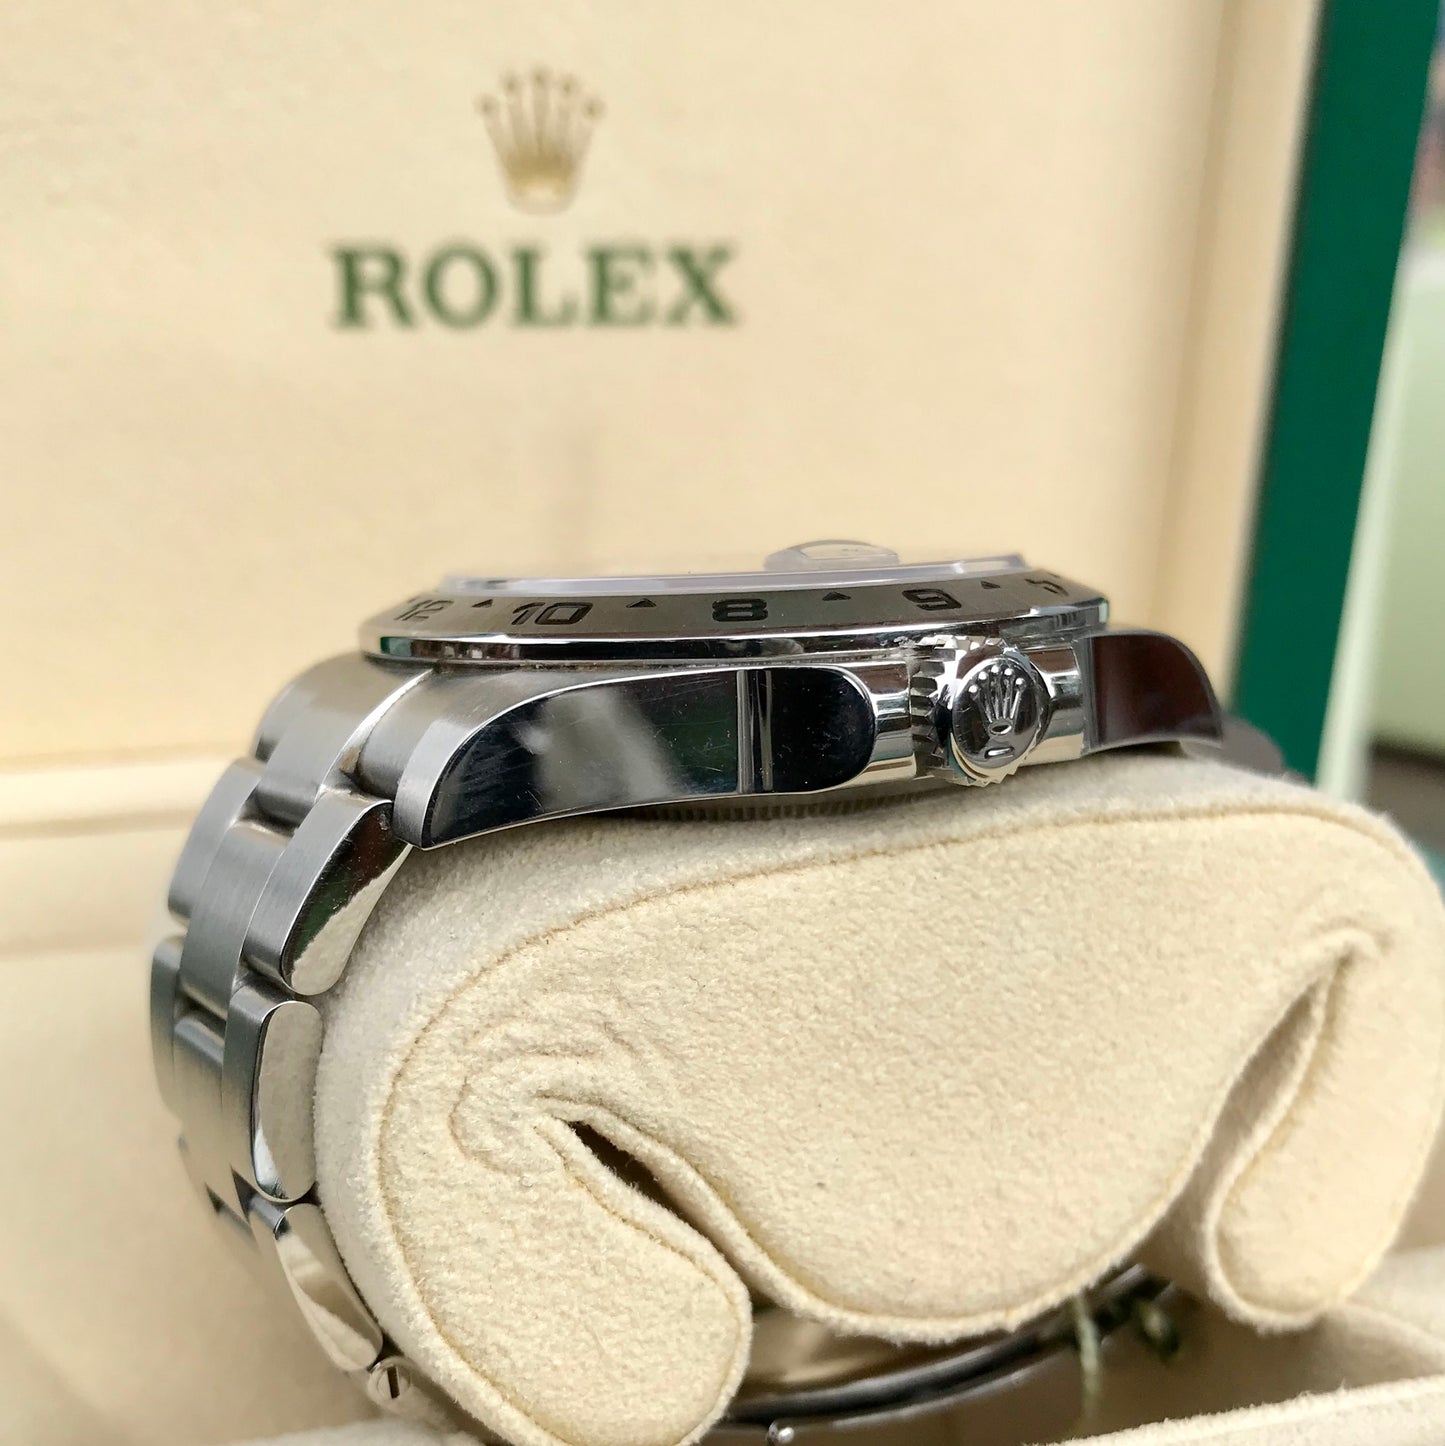 Rolex Explorer II 216570 White GMT Oyster Stainelss Steel Wristwatch Box & Papers Random Serial - Hashtag Watch Company